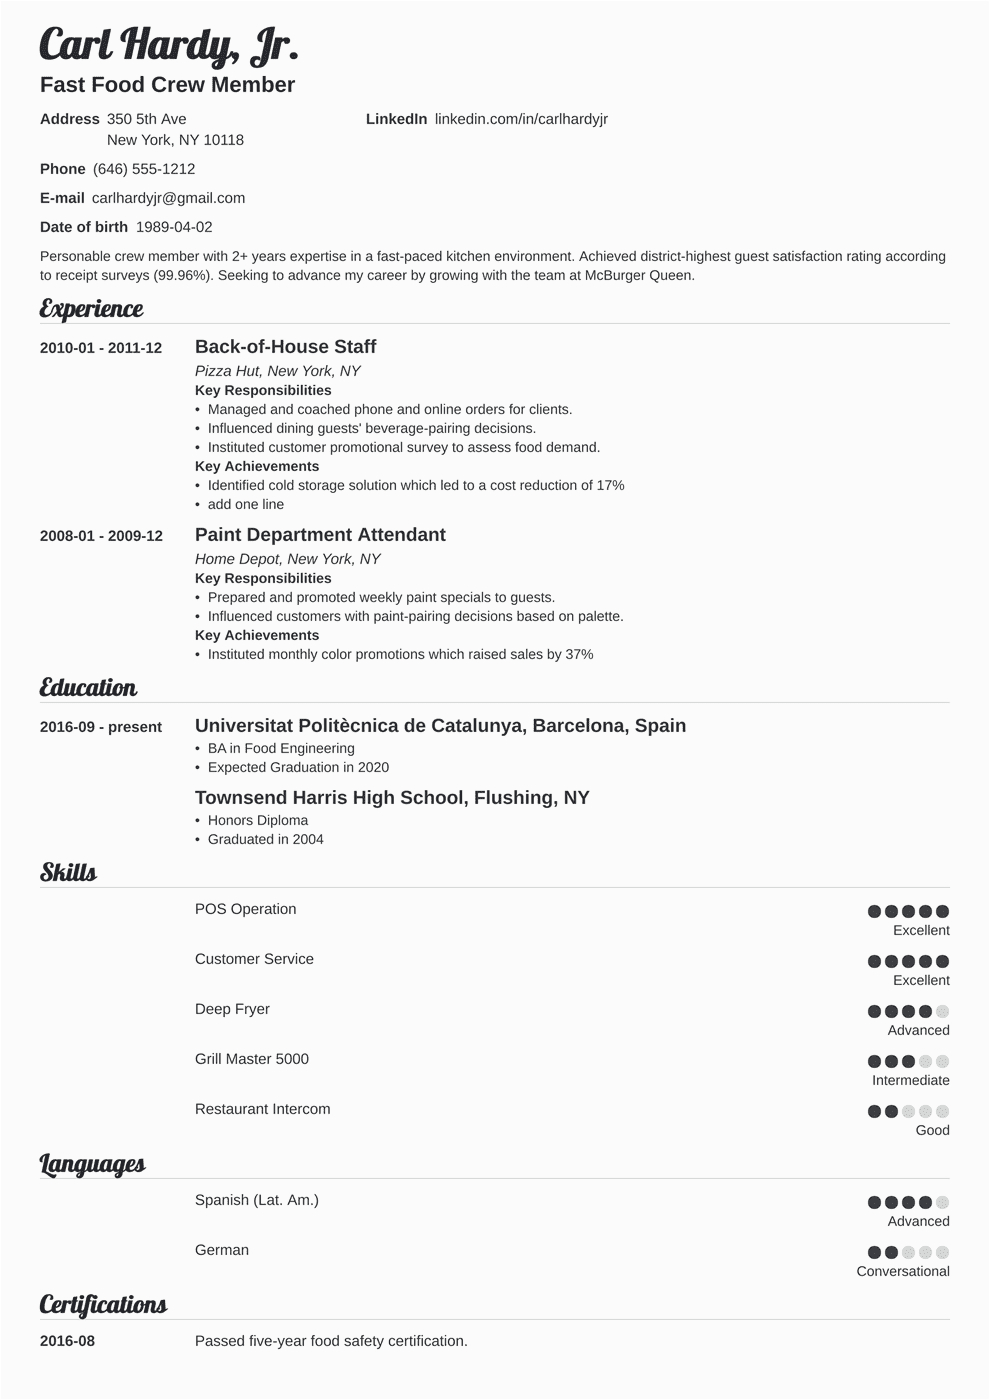 Sample Resume for Fast Food Worker Fast Food Resume Sample & Writing Guide 10 Tips